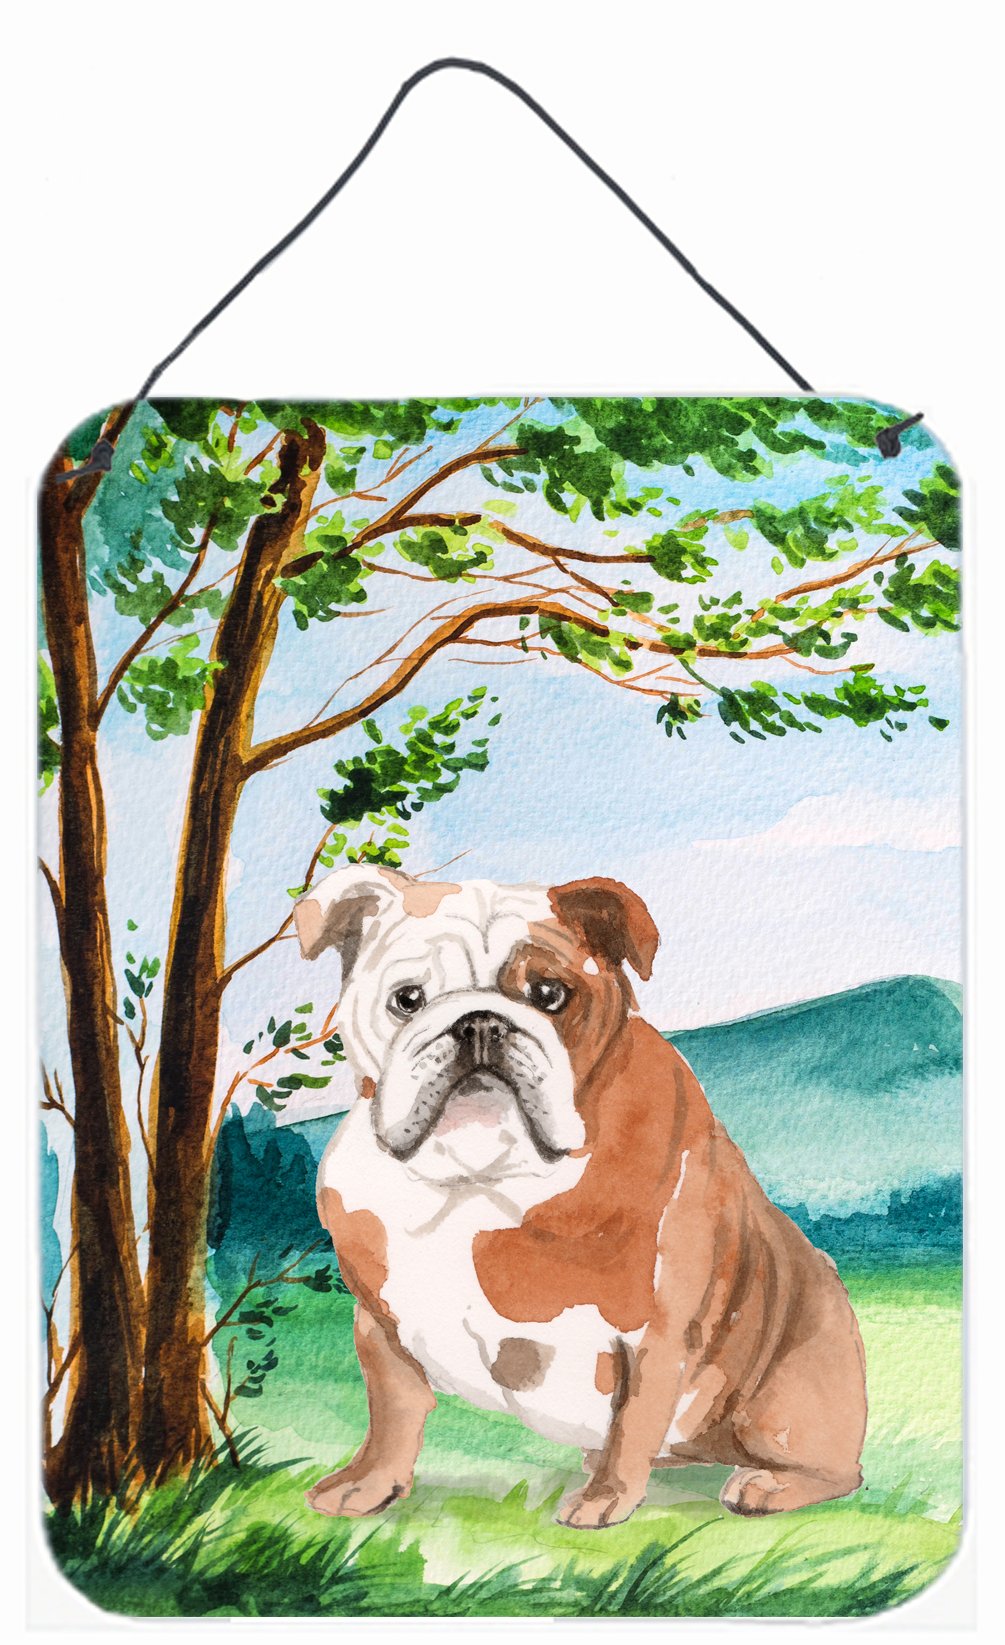 Under the Tree English Bulldog Wall or Door Hanging Prints CK2014DS1216 by Caroline's Treasures